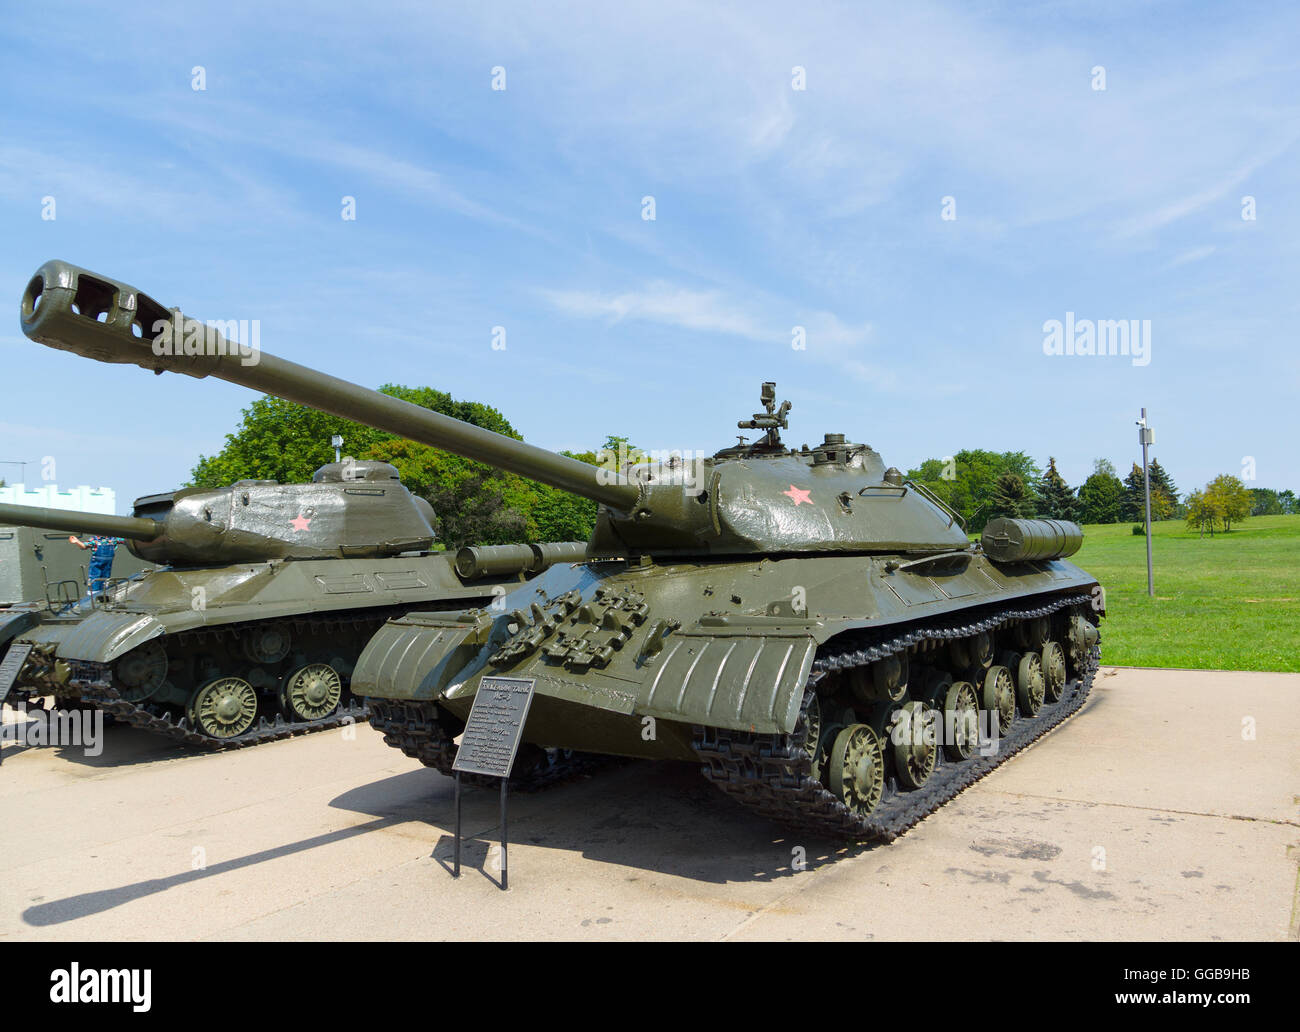 Minsk, Belarus - July 17, 2016: exhibition of military equipment since World War II near the memorial complex 'Hill of Glory' in Stock Photo